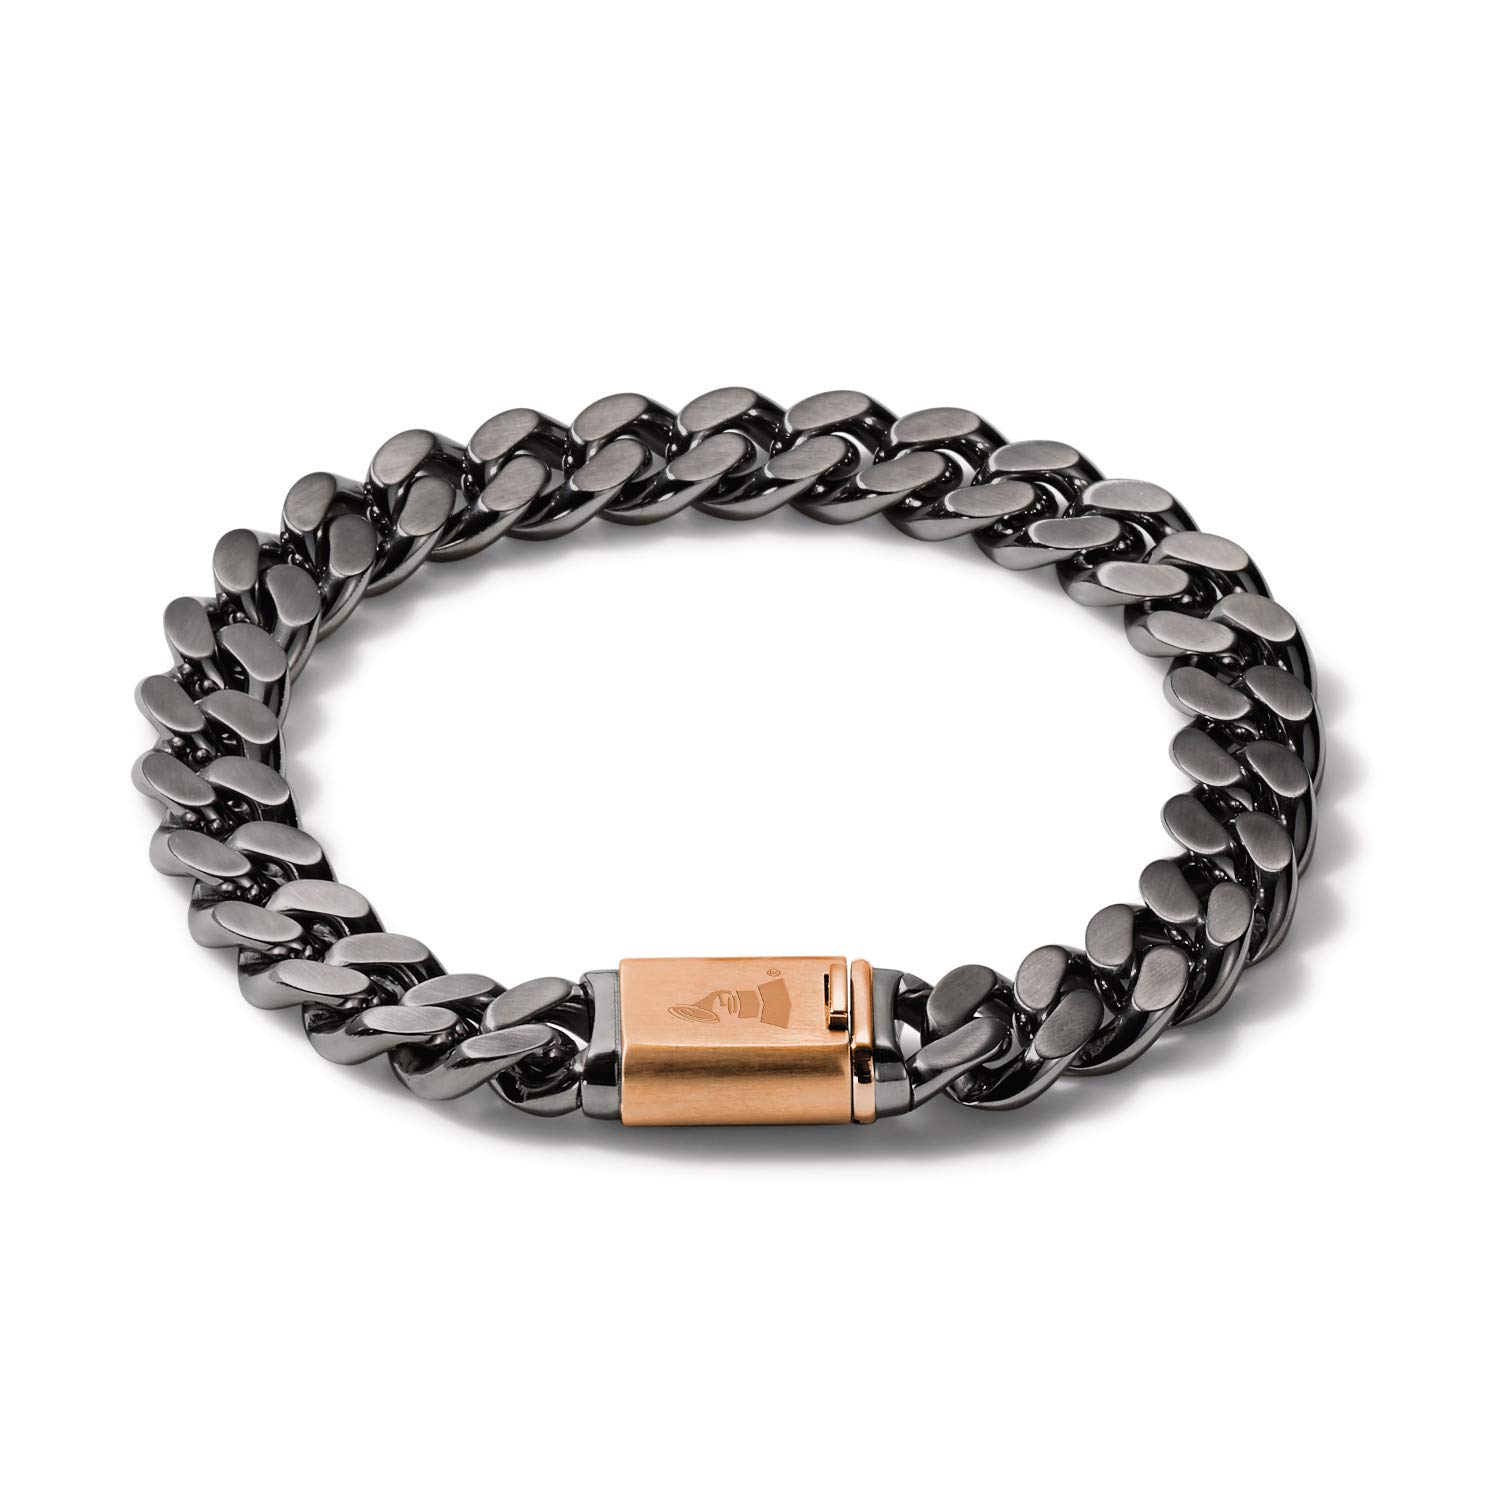 Bulova Men's Latin GRAMMY Grey Stainless Steel Chain Link Bracelet with Rose Gold Clasp